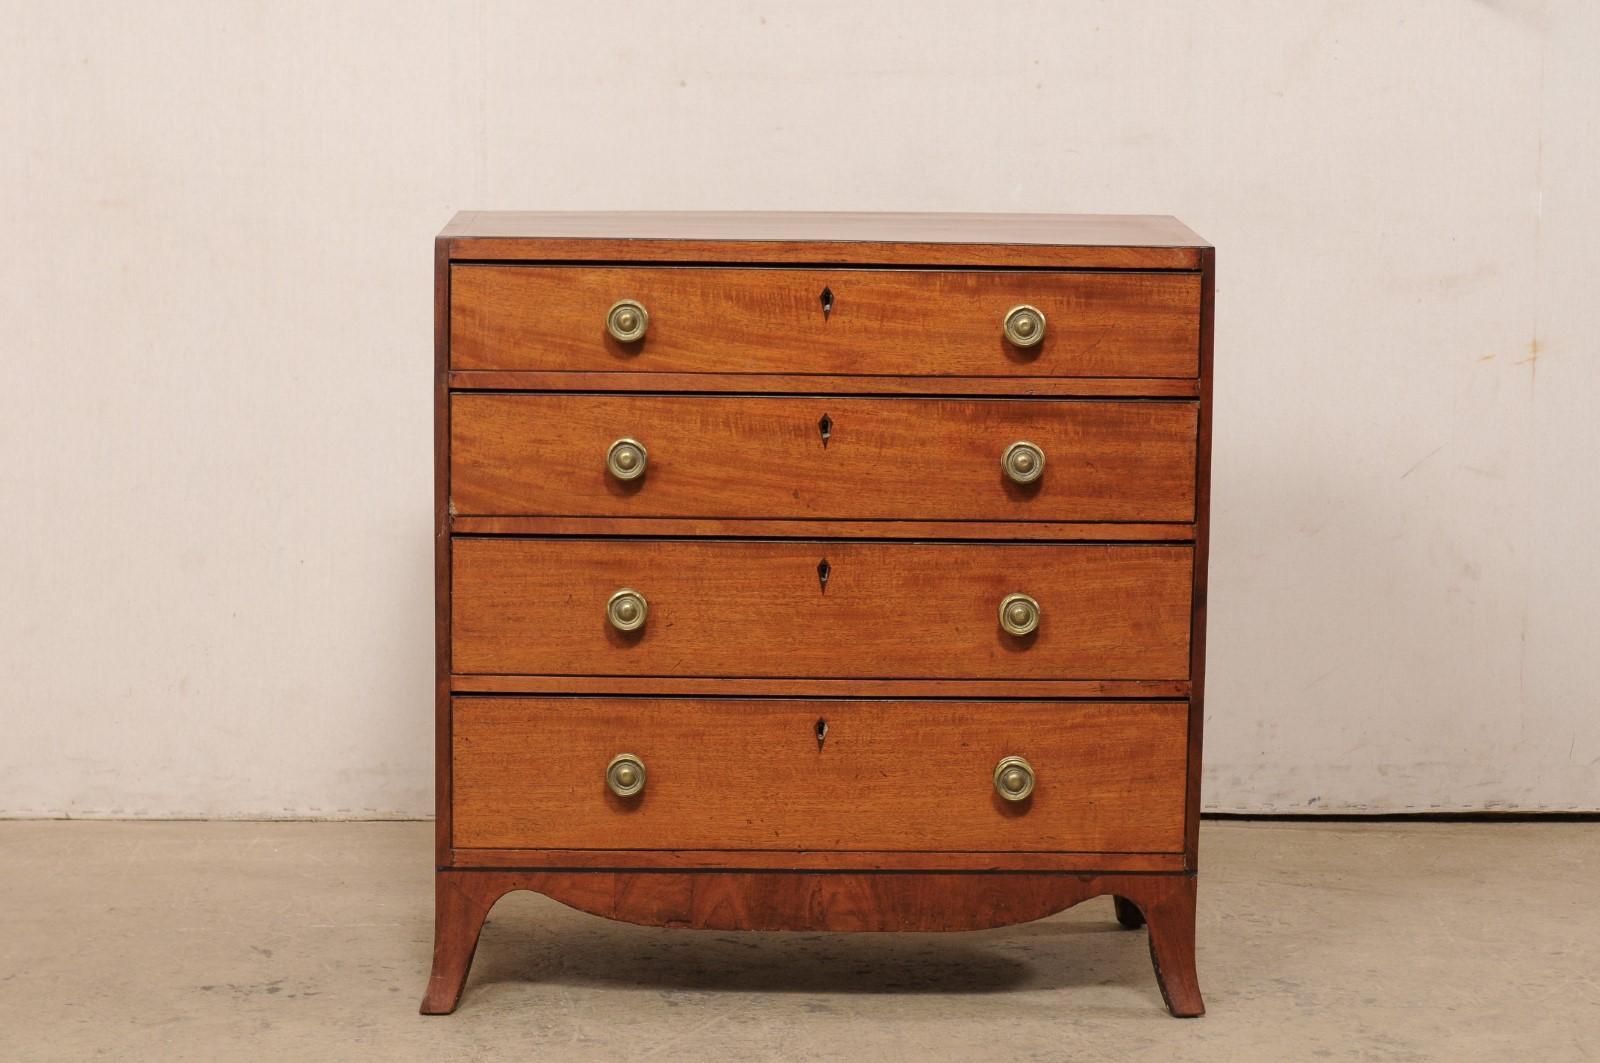 English Wooden Chest of 4 Drawers, Early to Mid 19th Century For Sale 9